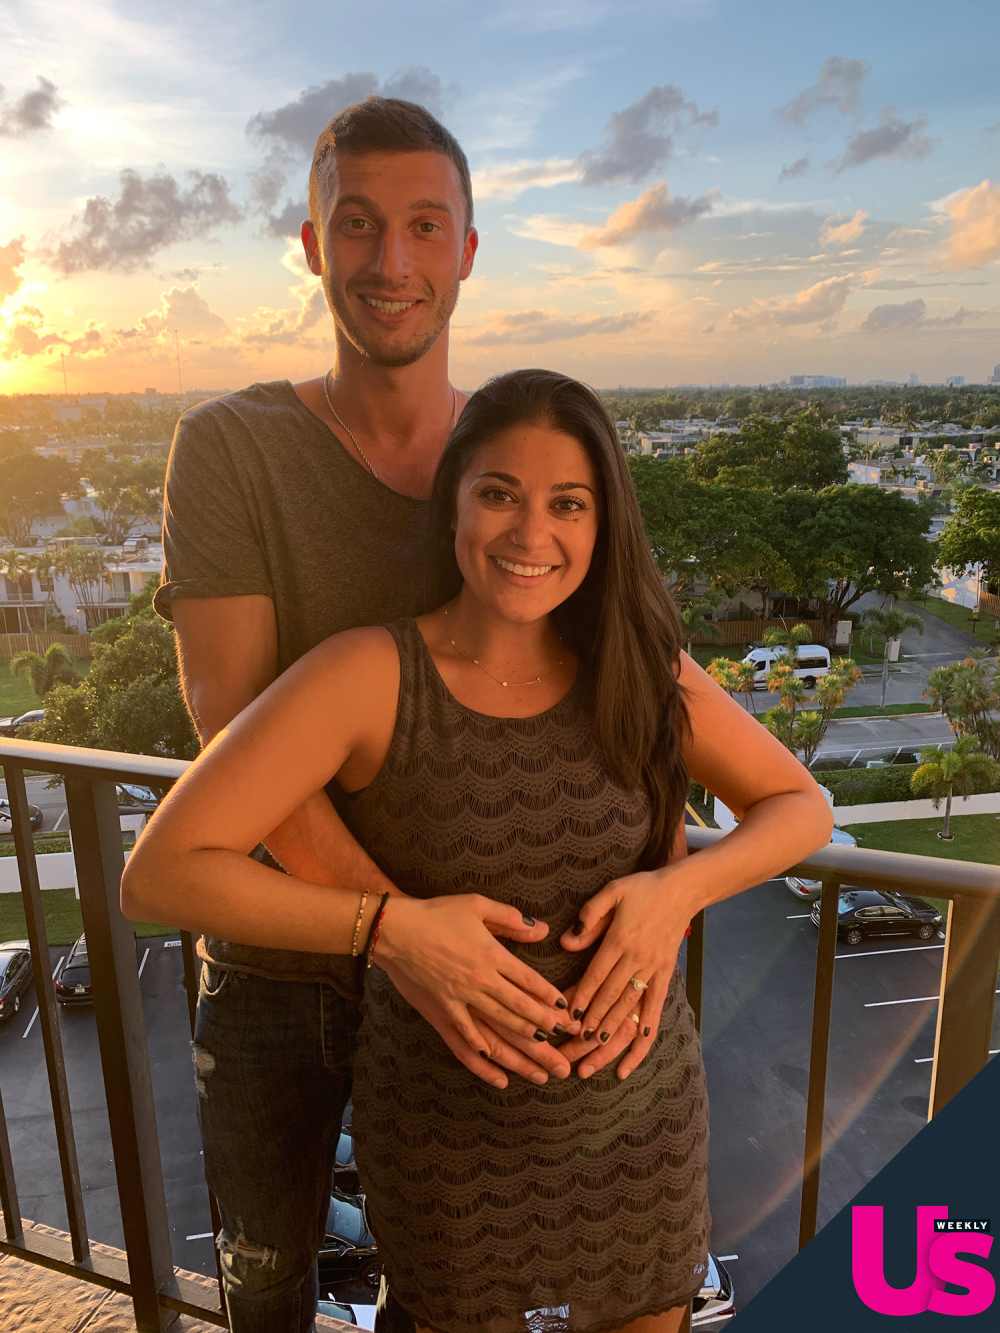 90 Day FIance's Loren and Alexei Are Pregnant With Their First Child